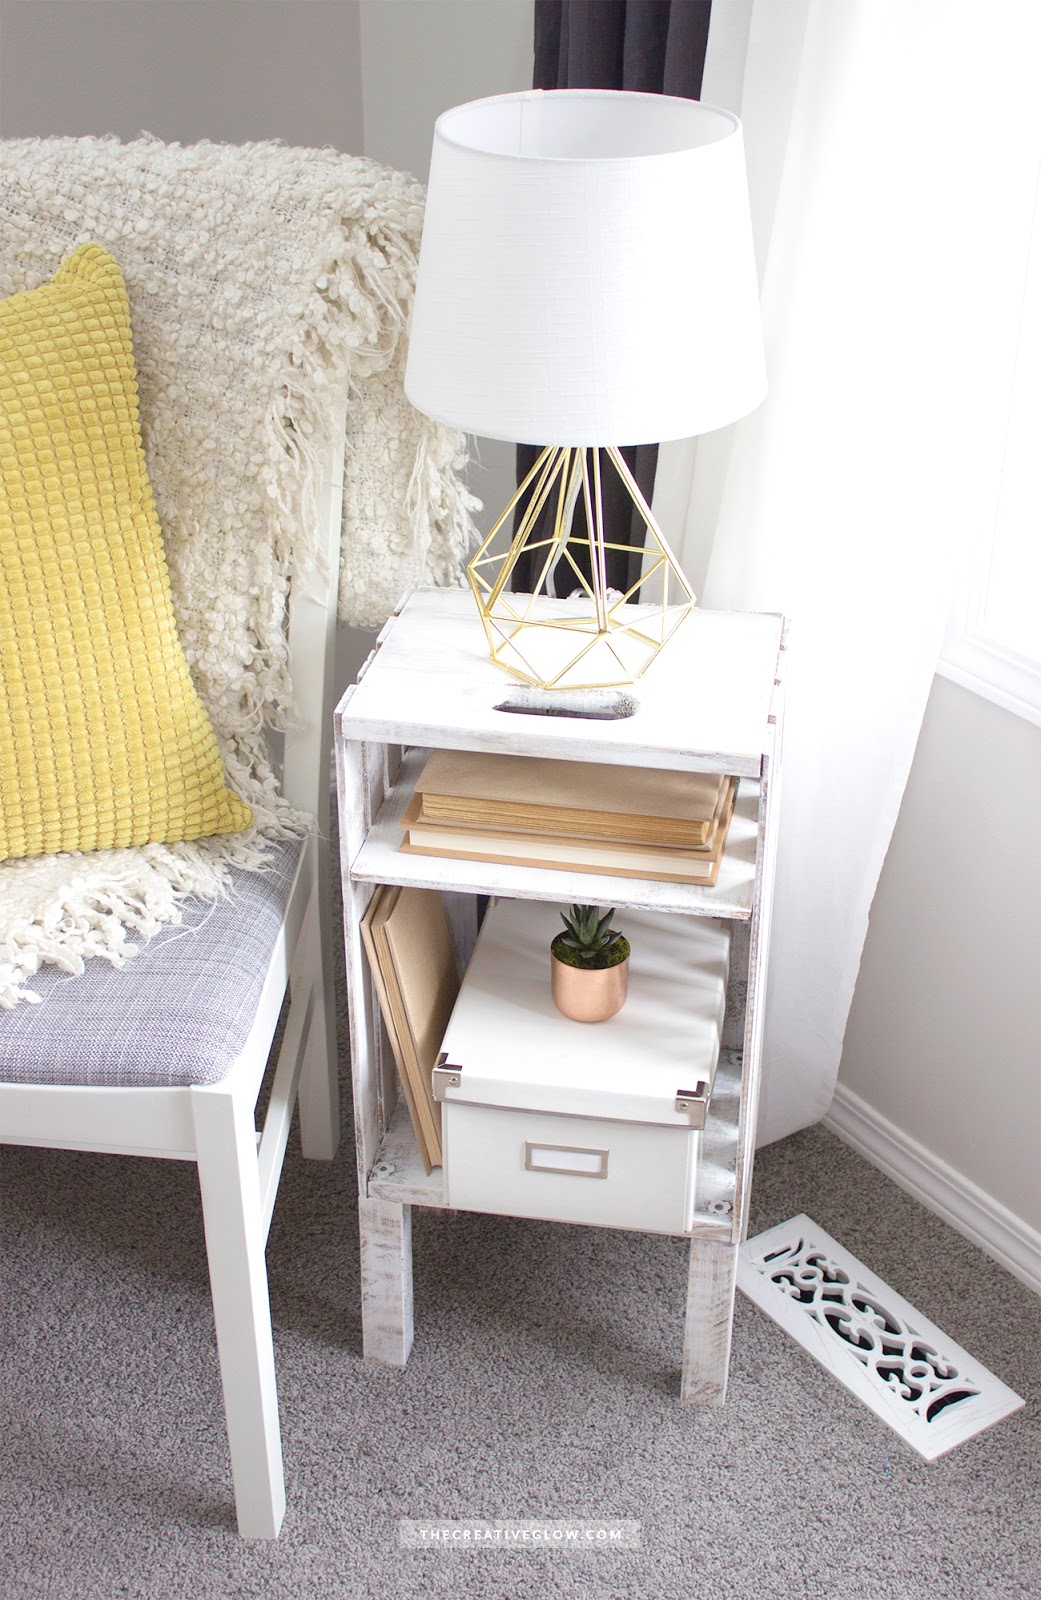 DIY Wood Crate Side Table - Quick, Easy, Inexpensive ...